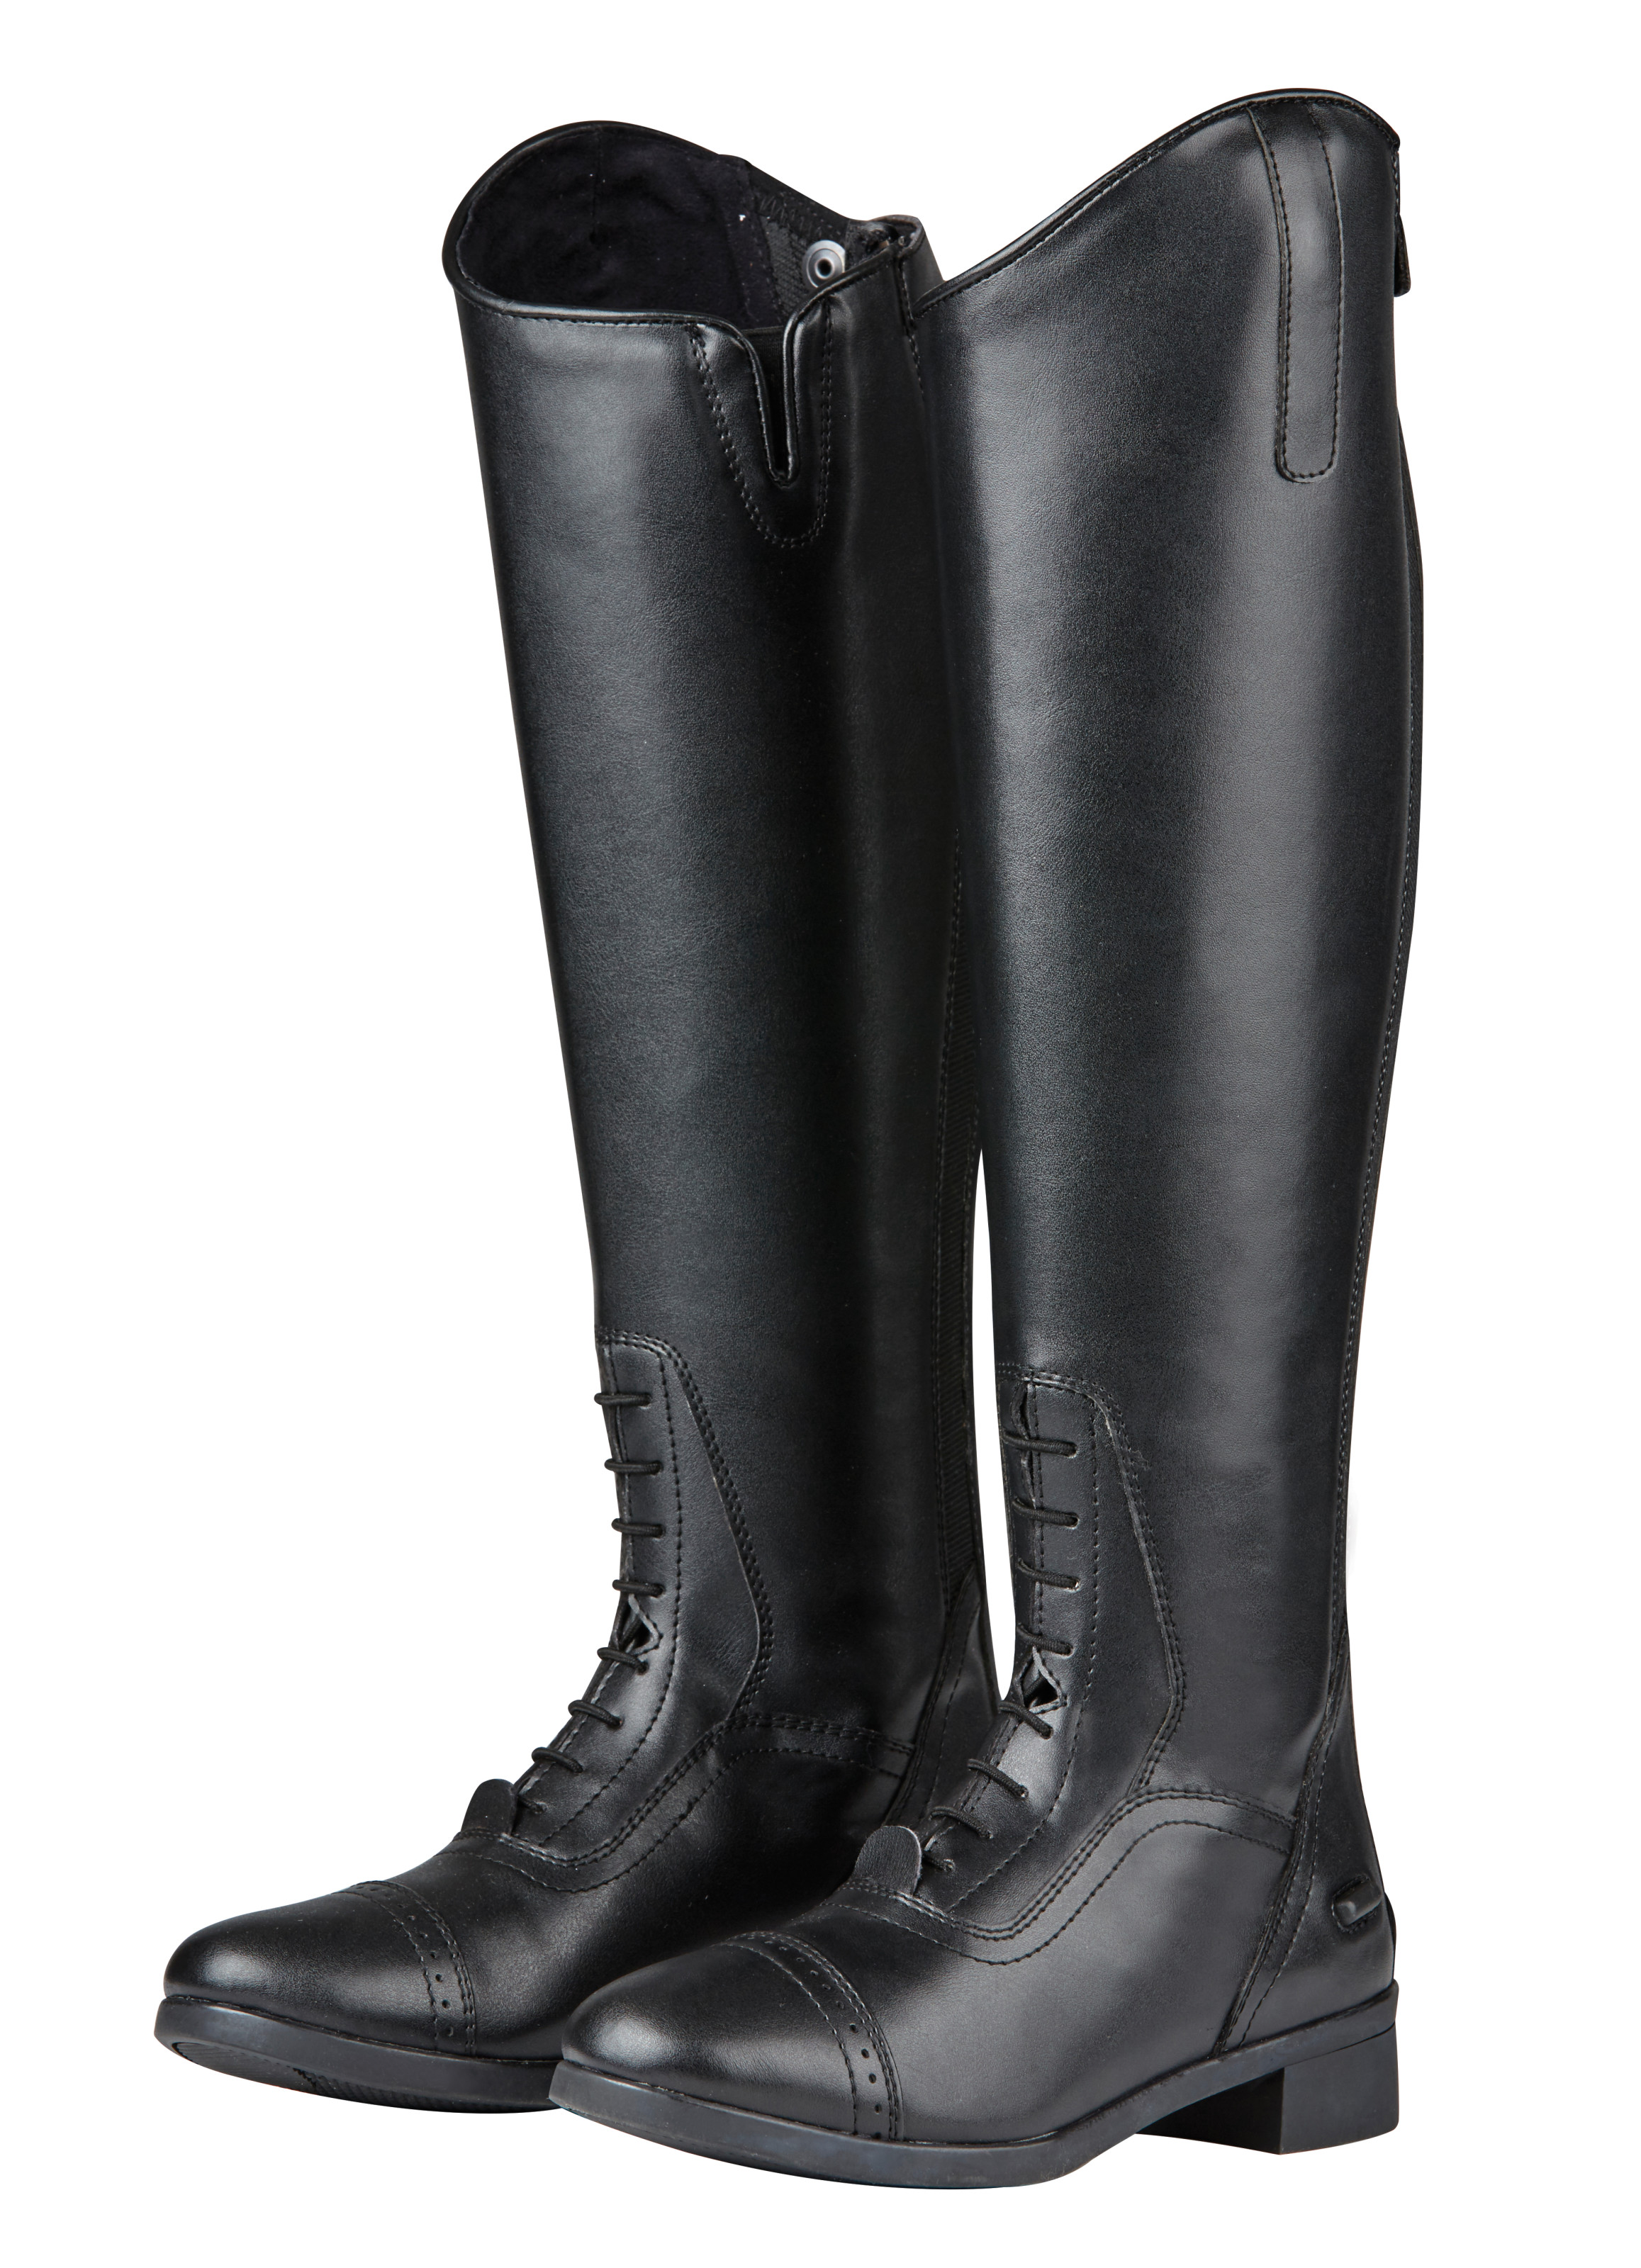 EQUISTAR Womens All-Weather Synthetic Field Equastrian Riding Boot Black 7 Regular 